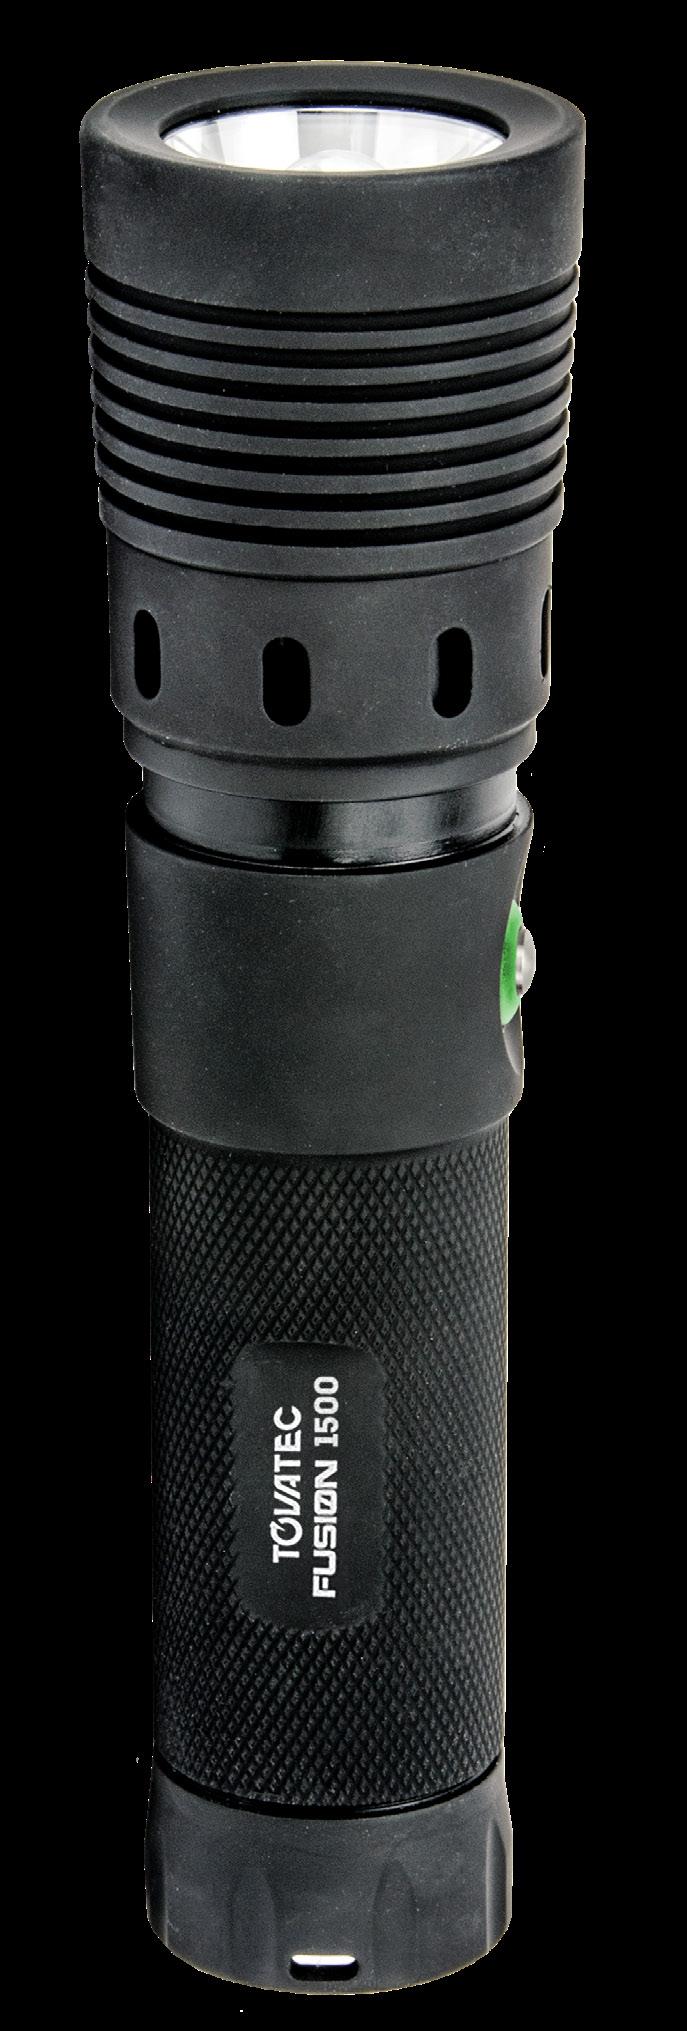 FUSION 1500 NEW LED VIDEO / FLASHLIGHT PART # FUS1500 FUSION 1500 The Fusion 1500 provides an amazing amount of light for any dive whether you are diving on a wreck, in a cave or just drifting along